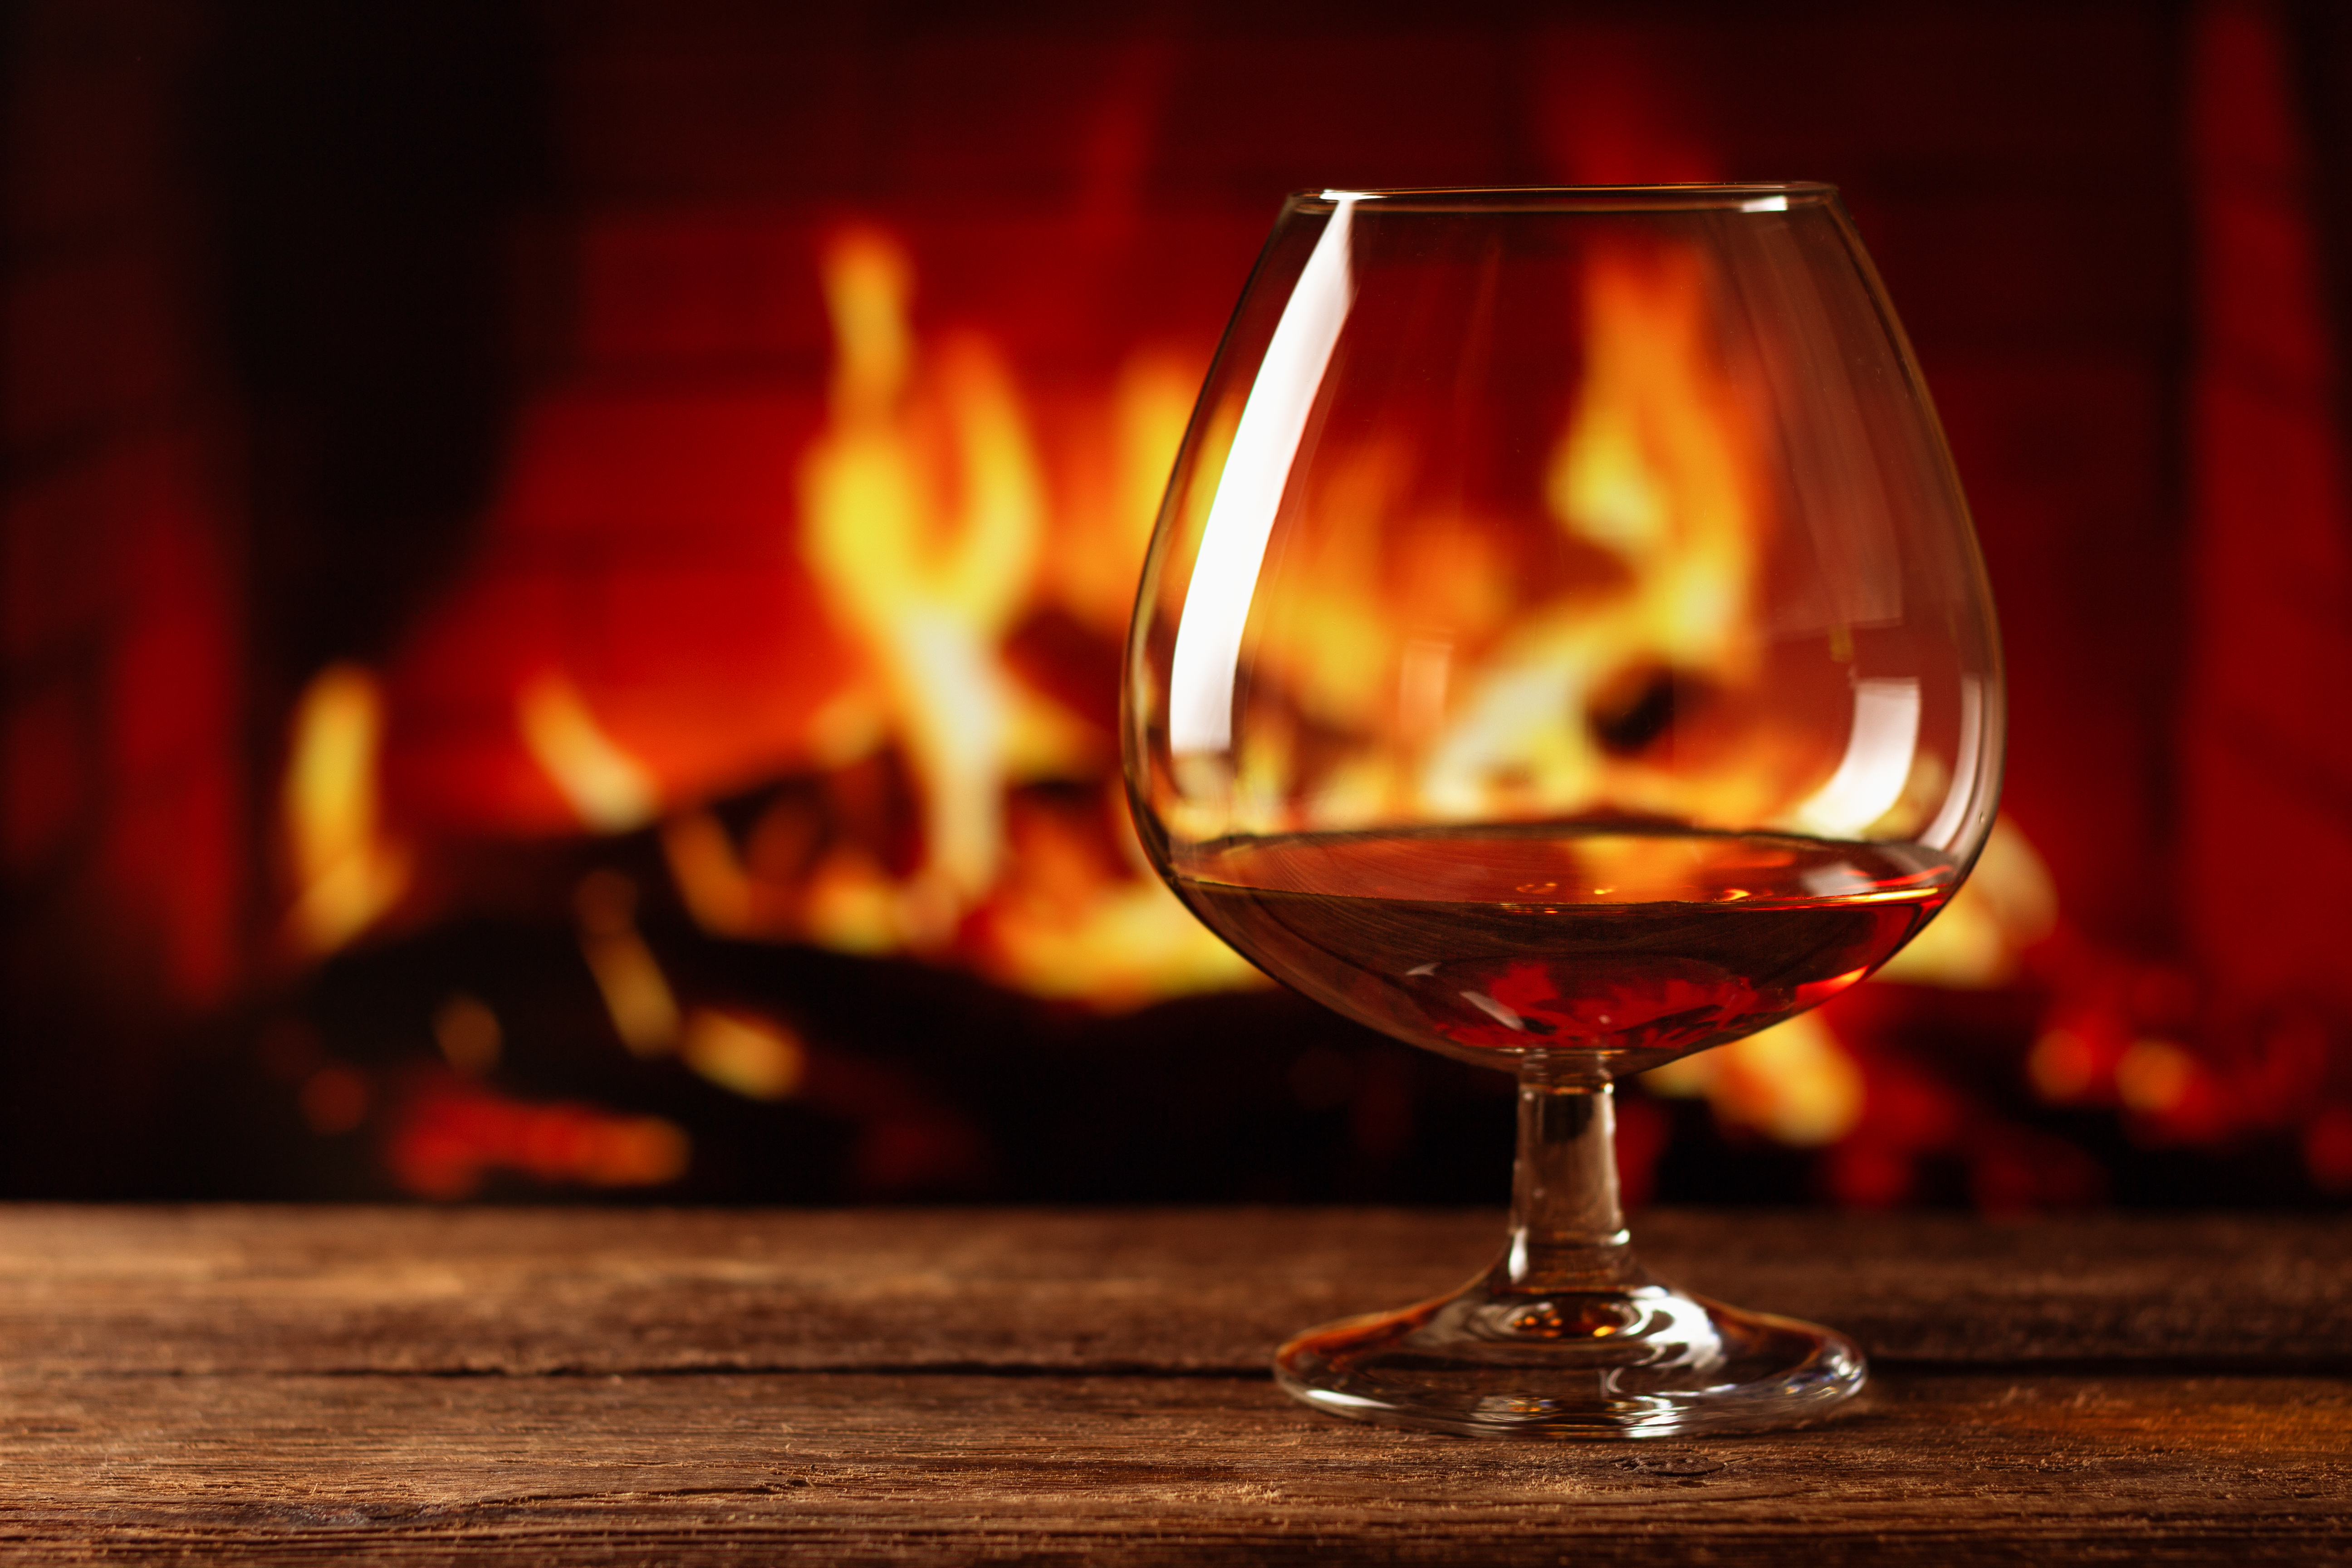 A glass of brandy in front of a fireplace.